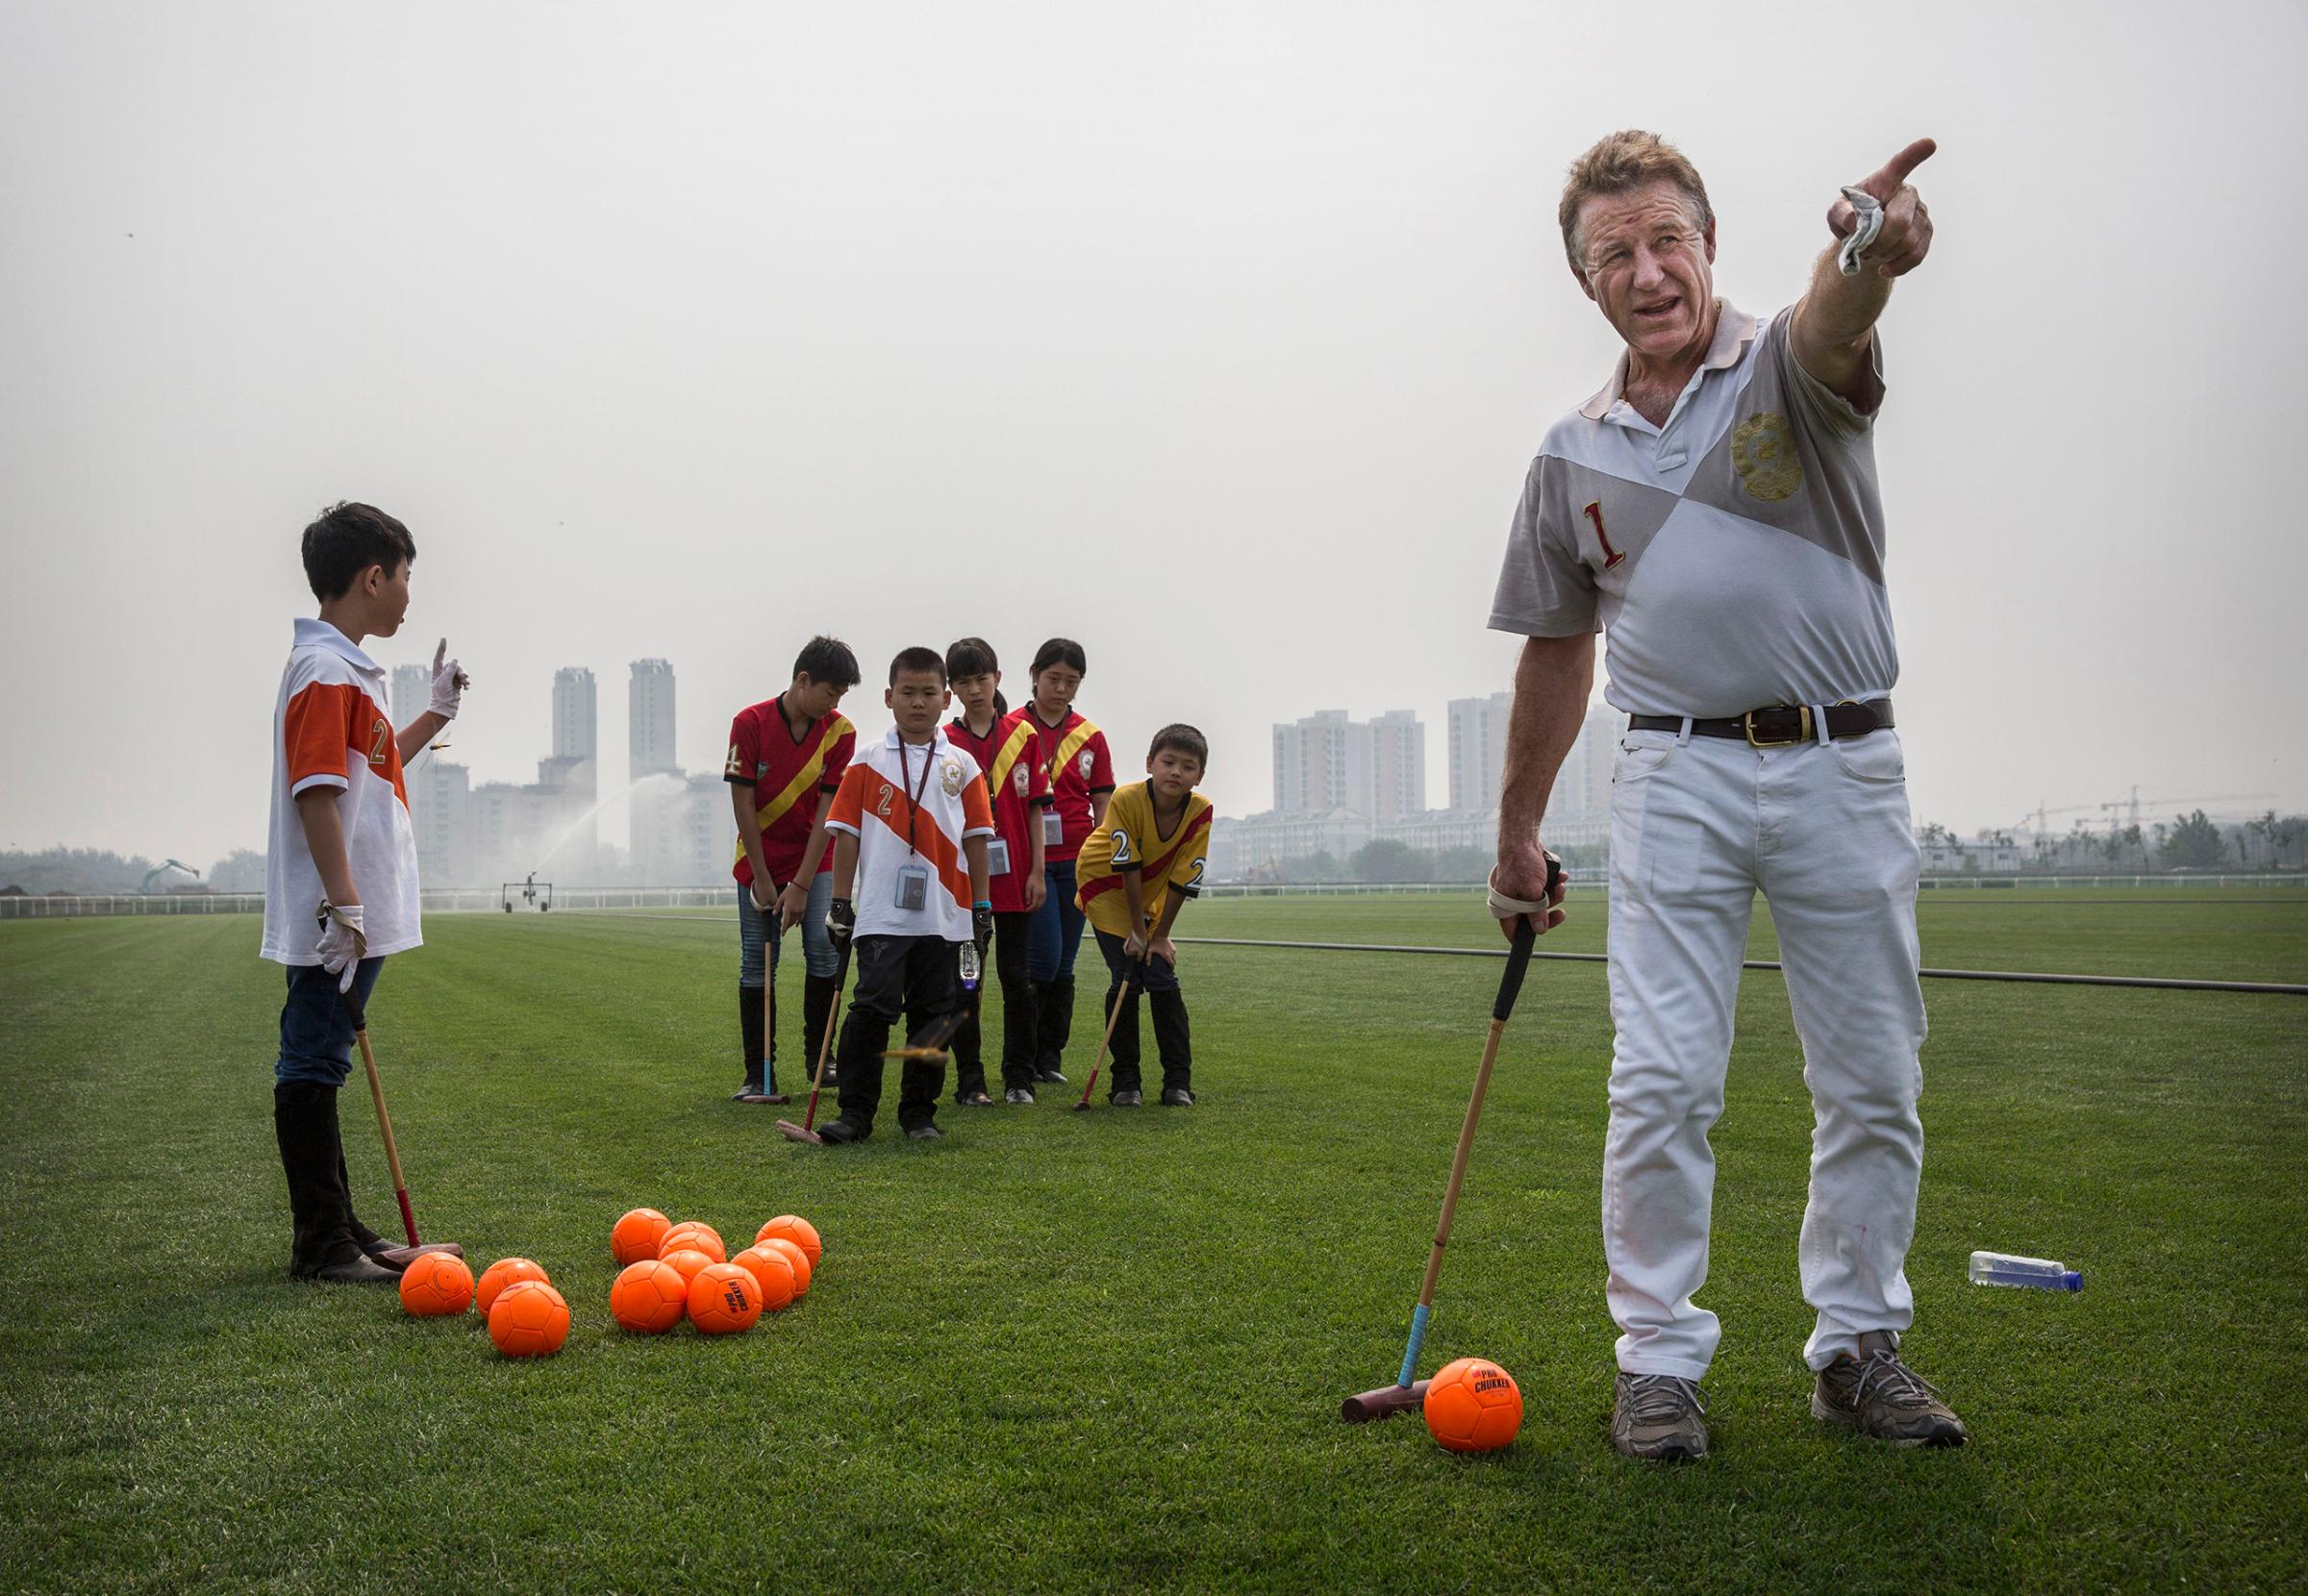 Derek Reid, director of Polo Operations, gestures as he instructs young Chinese players from the Junior Polo Program during stick and ball training at a summer camp held at the Tianjin Goldin Metropolitan Polo Club in Tianjin, China, on July 17, 2016.